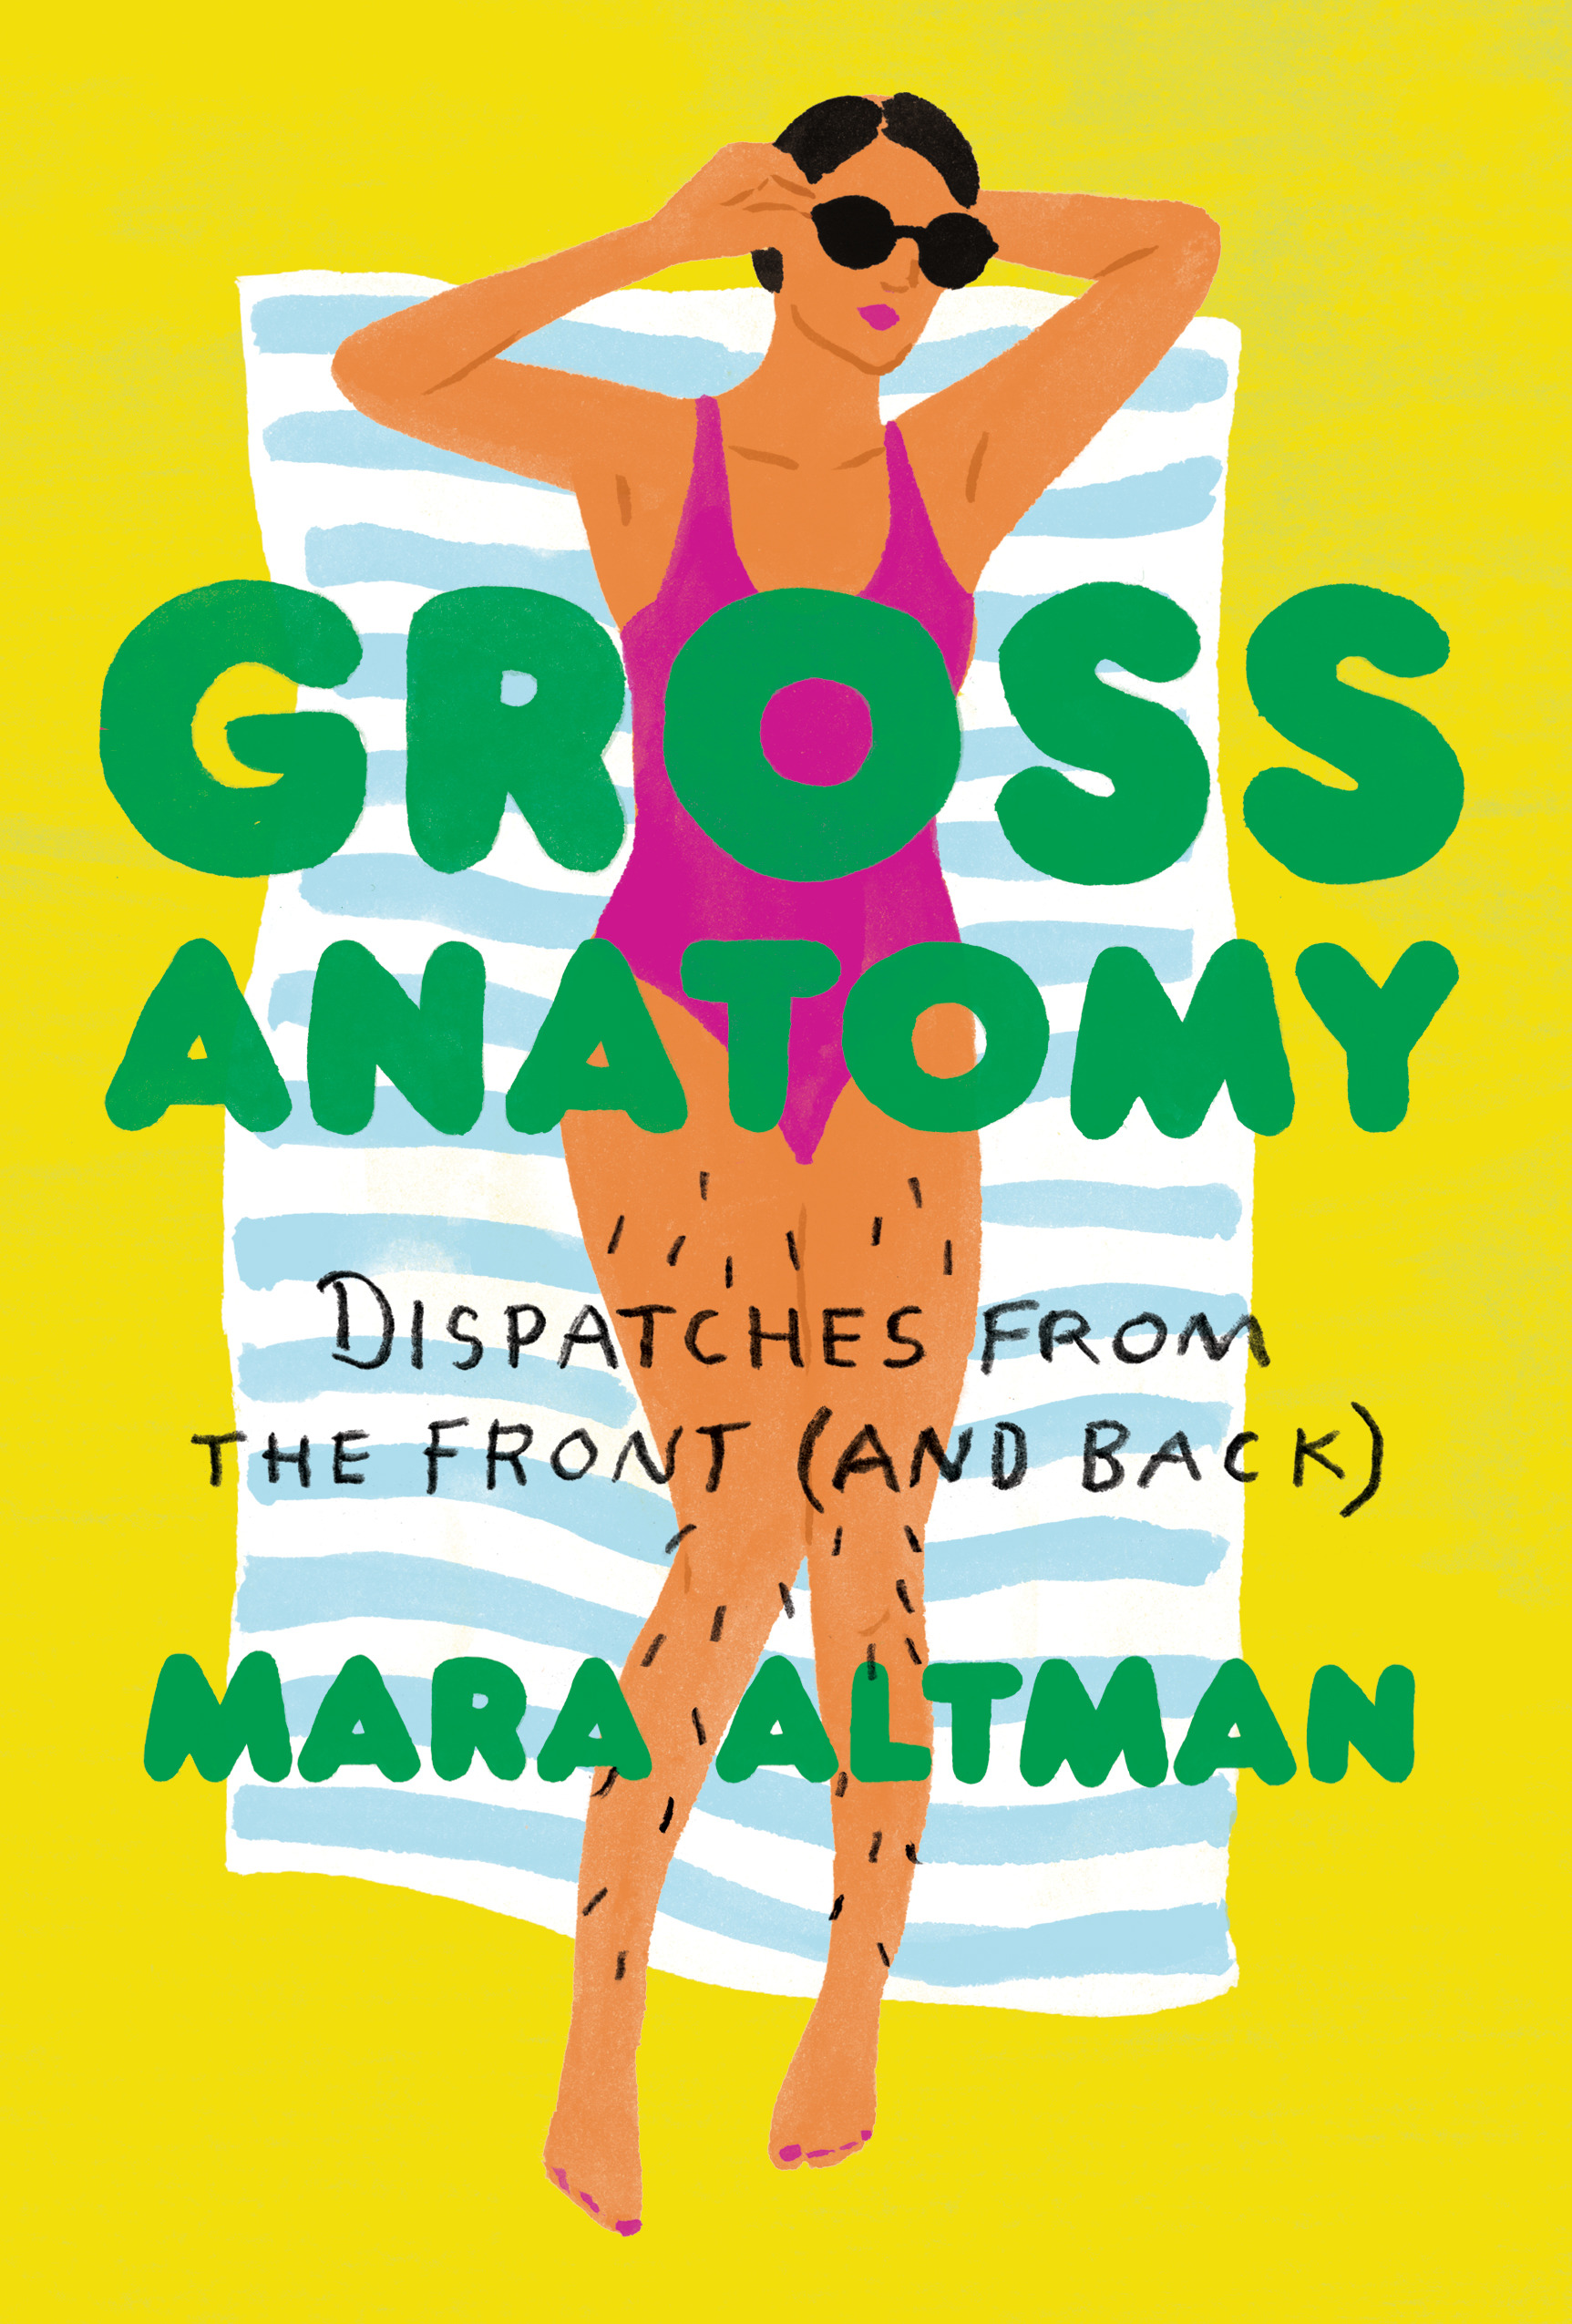 Cover of Gross anatomy, drawing of a woman in a swimsuit lying on a towel against a yellow background